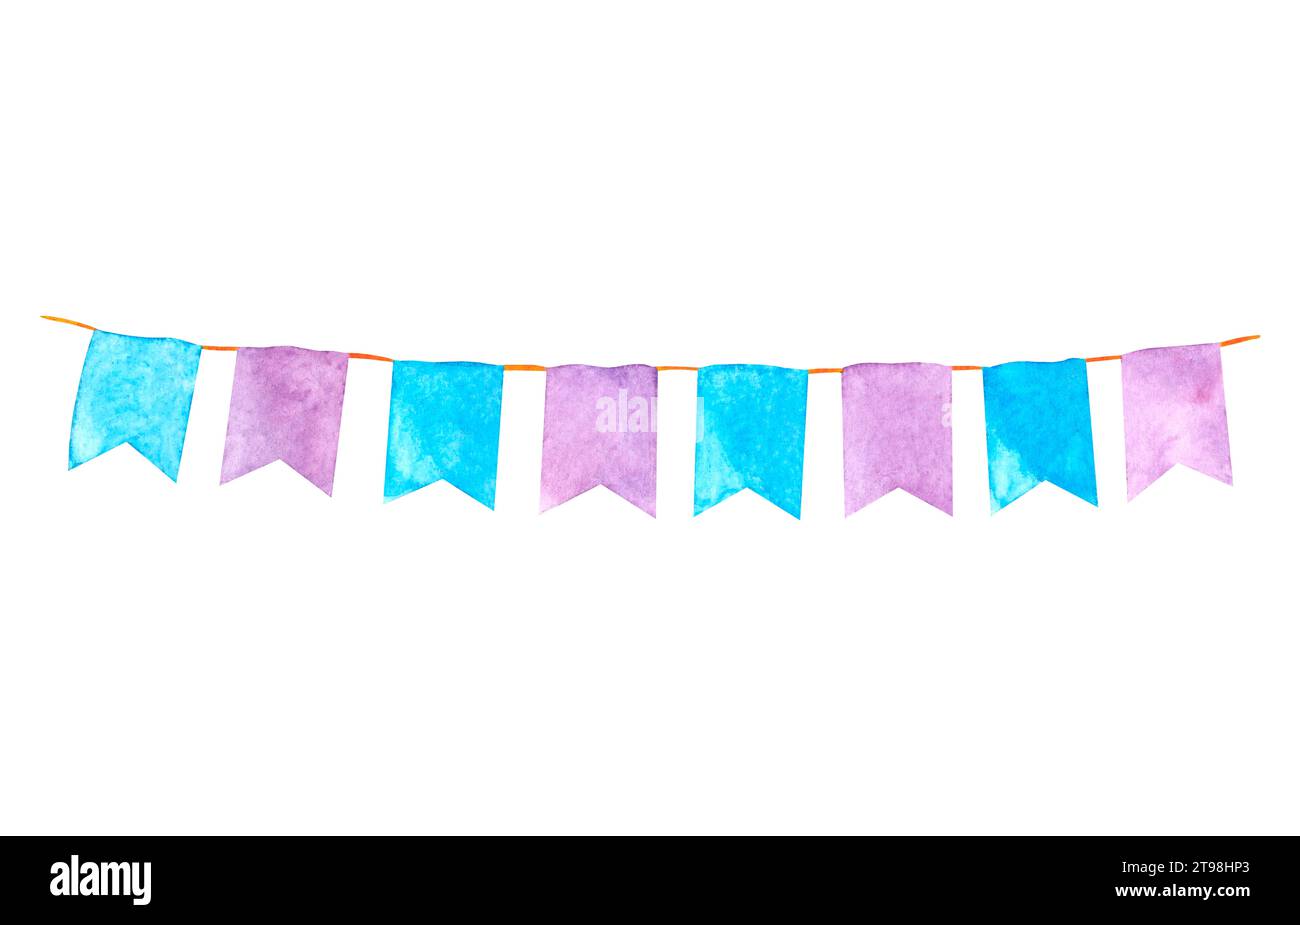 Watercolor holiday garland with colorful flags made of fabric and paper. Illustration hand painted isolated elements on white background. Christmas Stock Photo